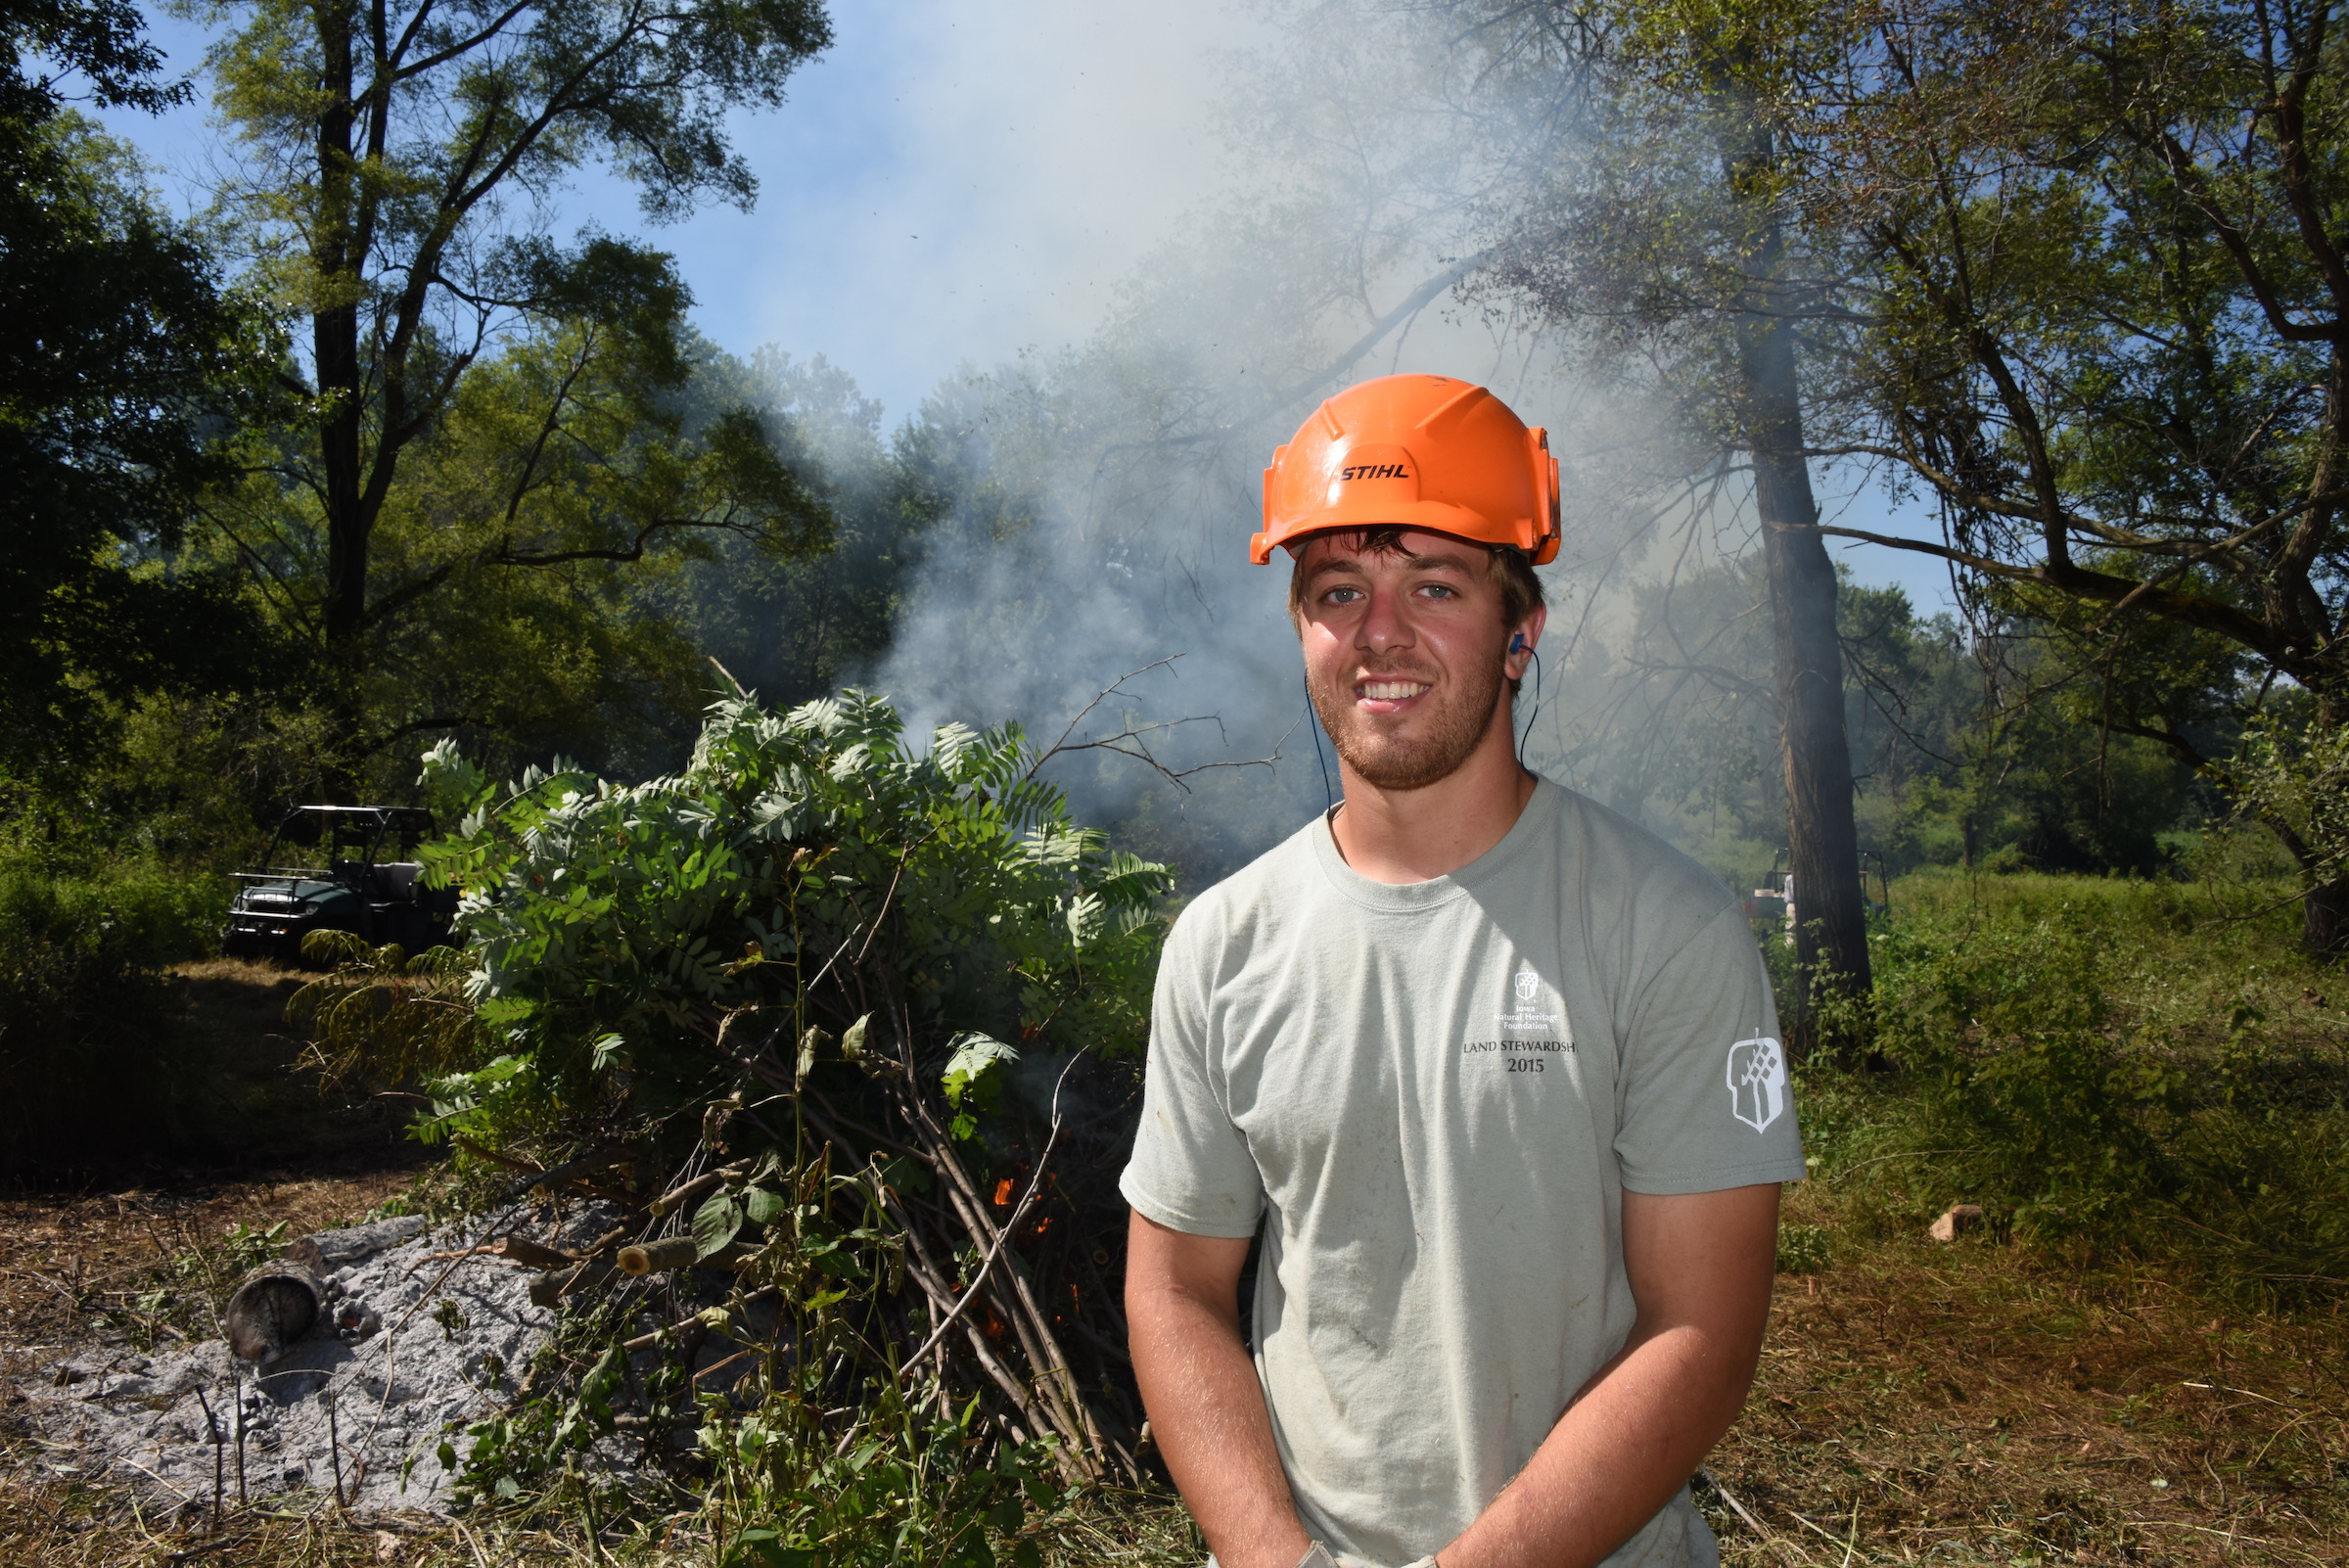 Matt Monahan stands in front of burning brush to help preserve the Iowa landscapes